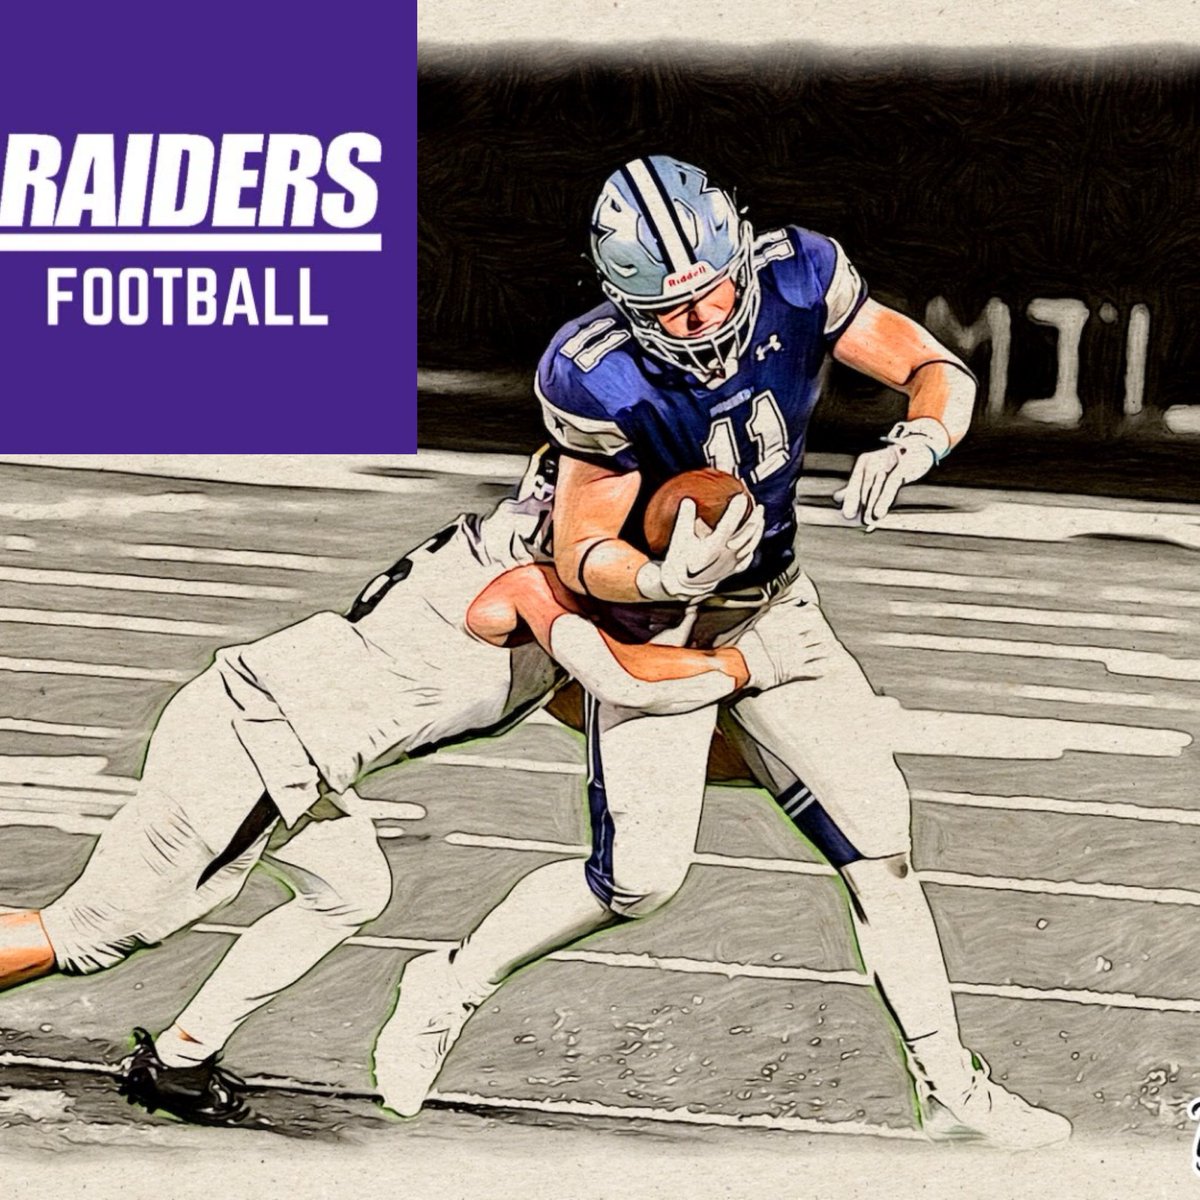 Also congrats to @Bomber_Football Brandon Bell on his commit to Mount Union University.